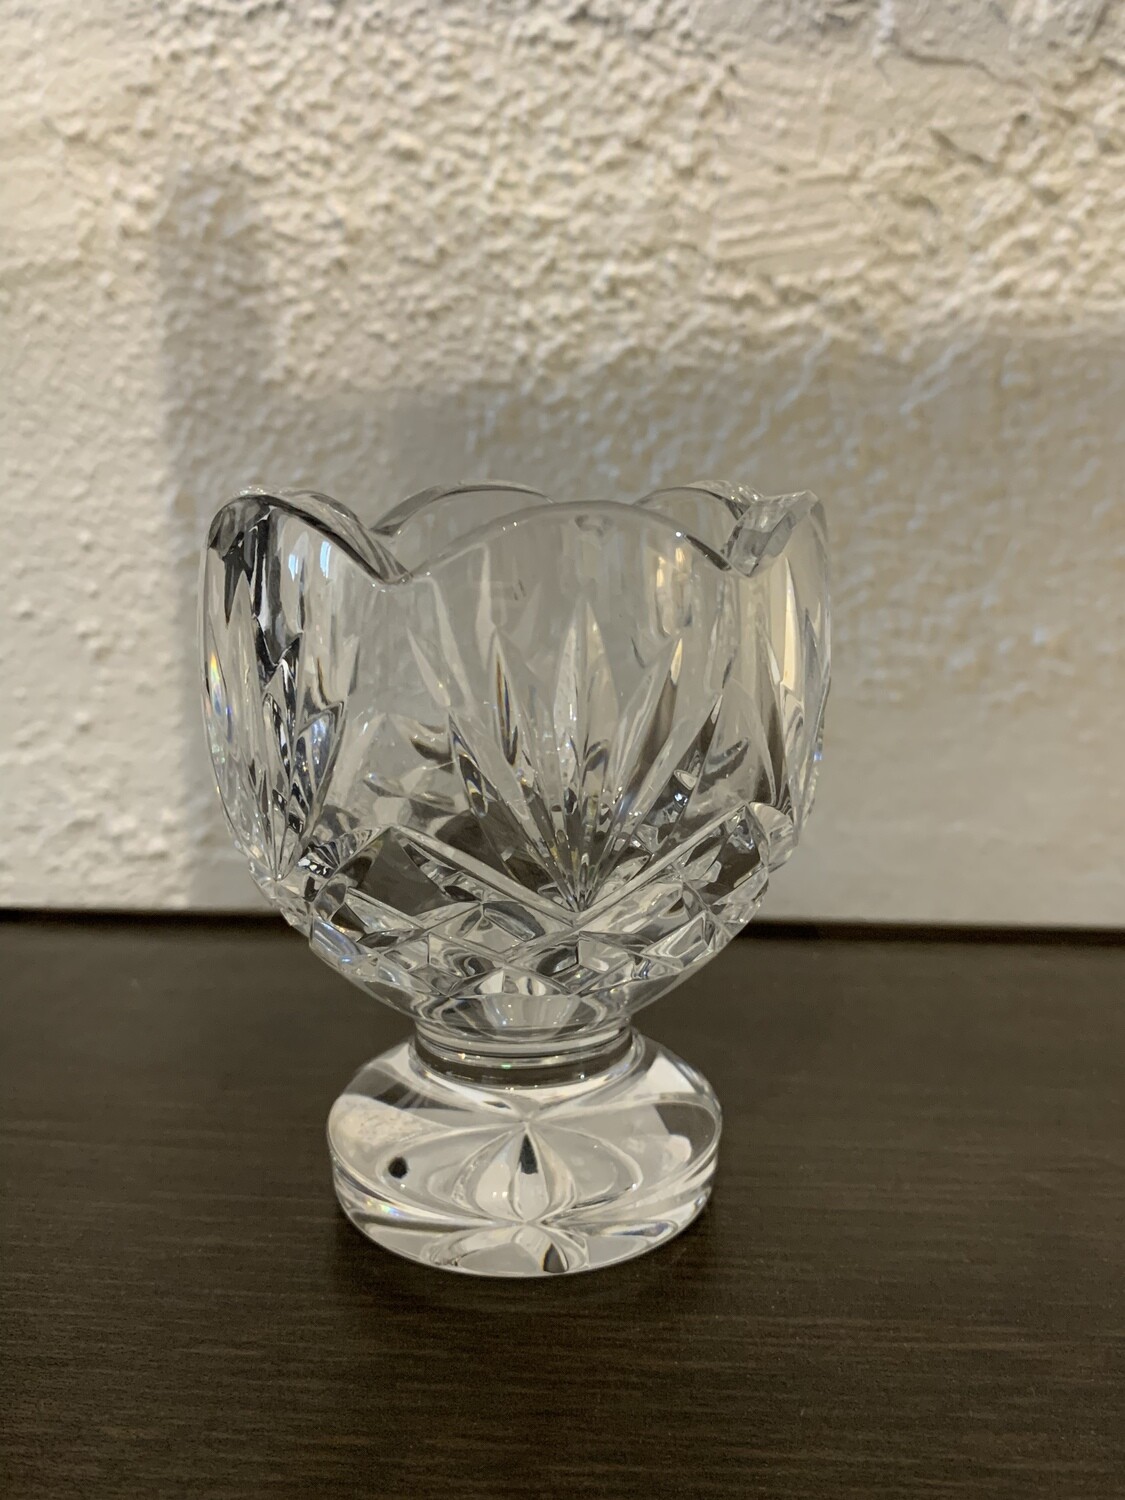 Waterford Crystal Etched Egg Cup with Scalloped Edges